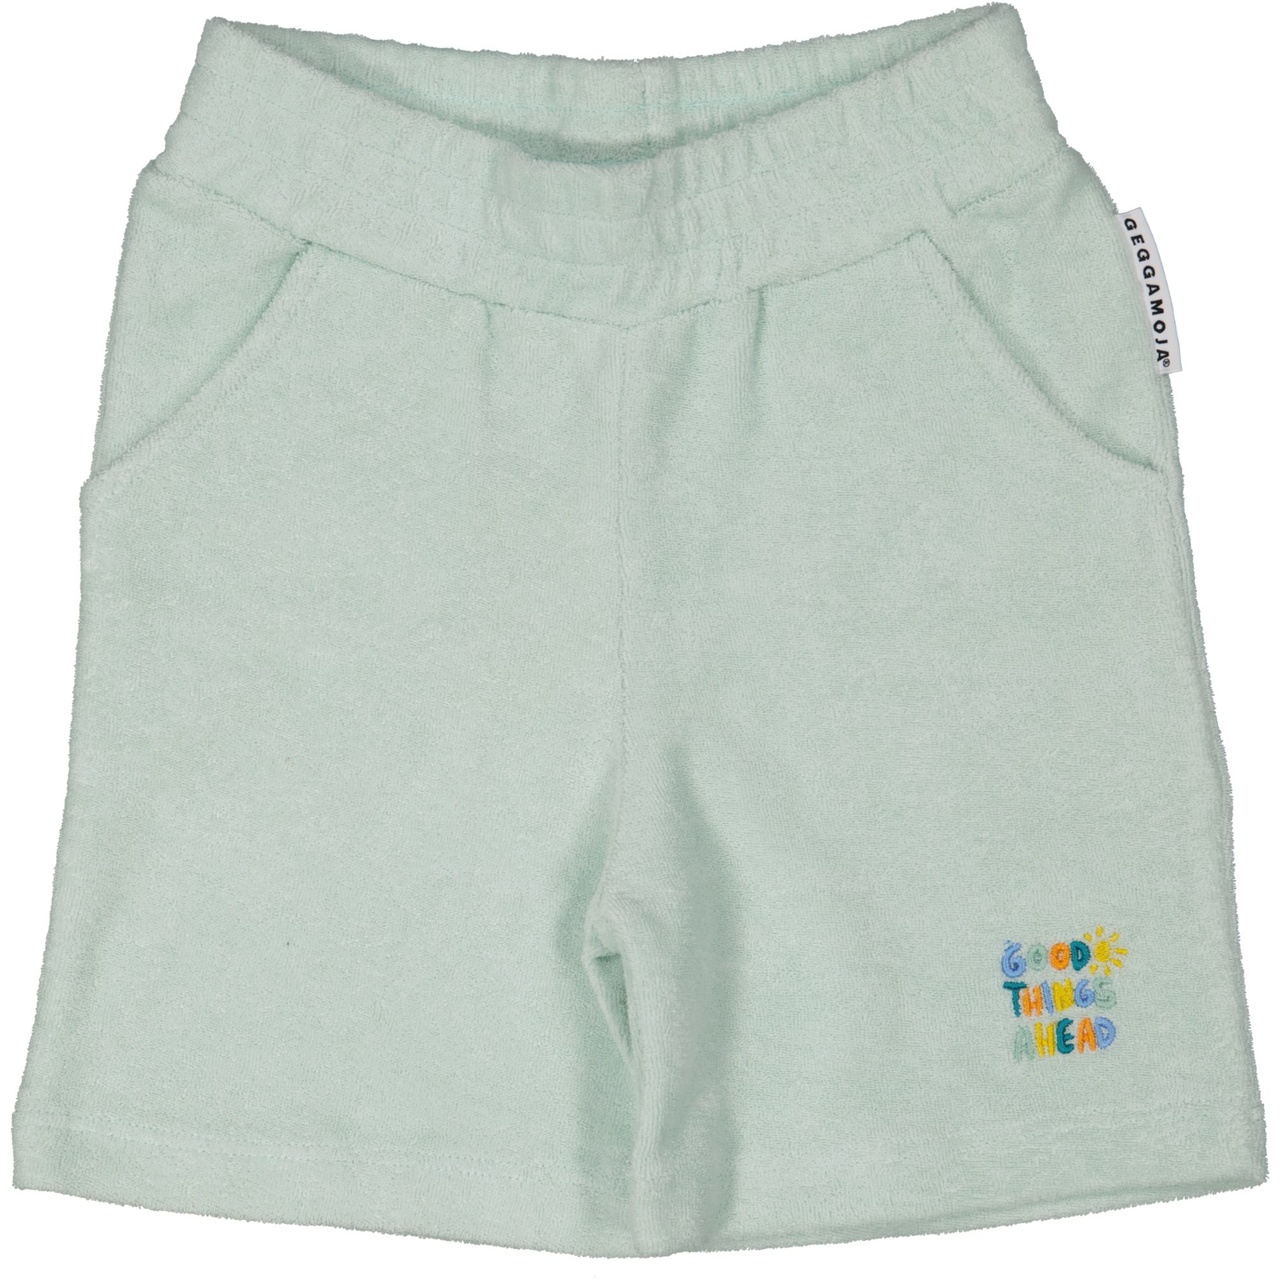 Terry shorts Green